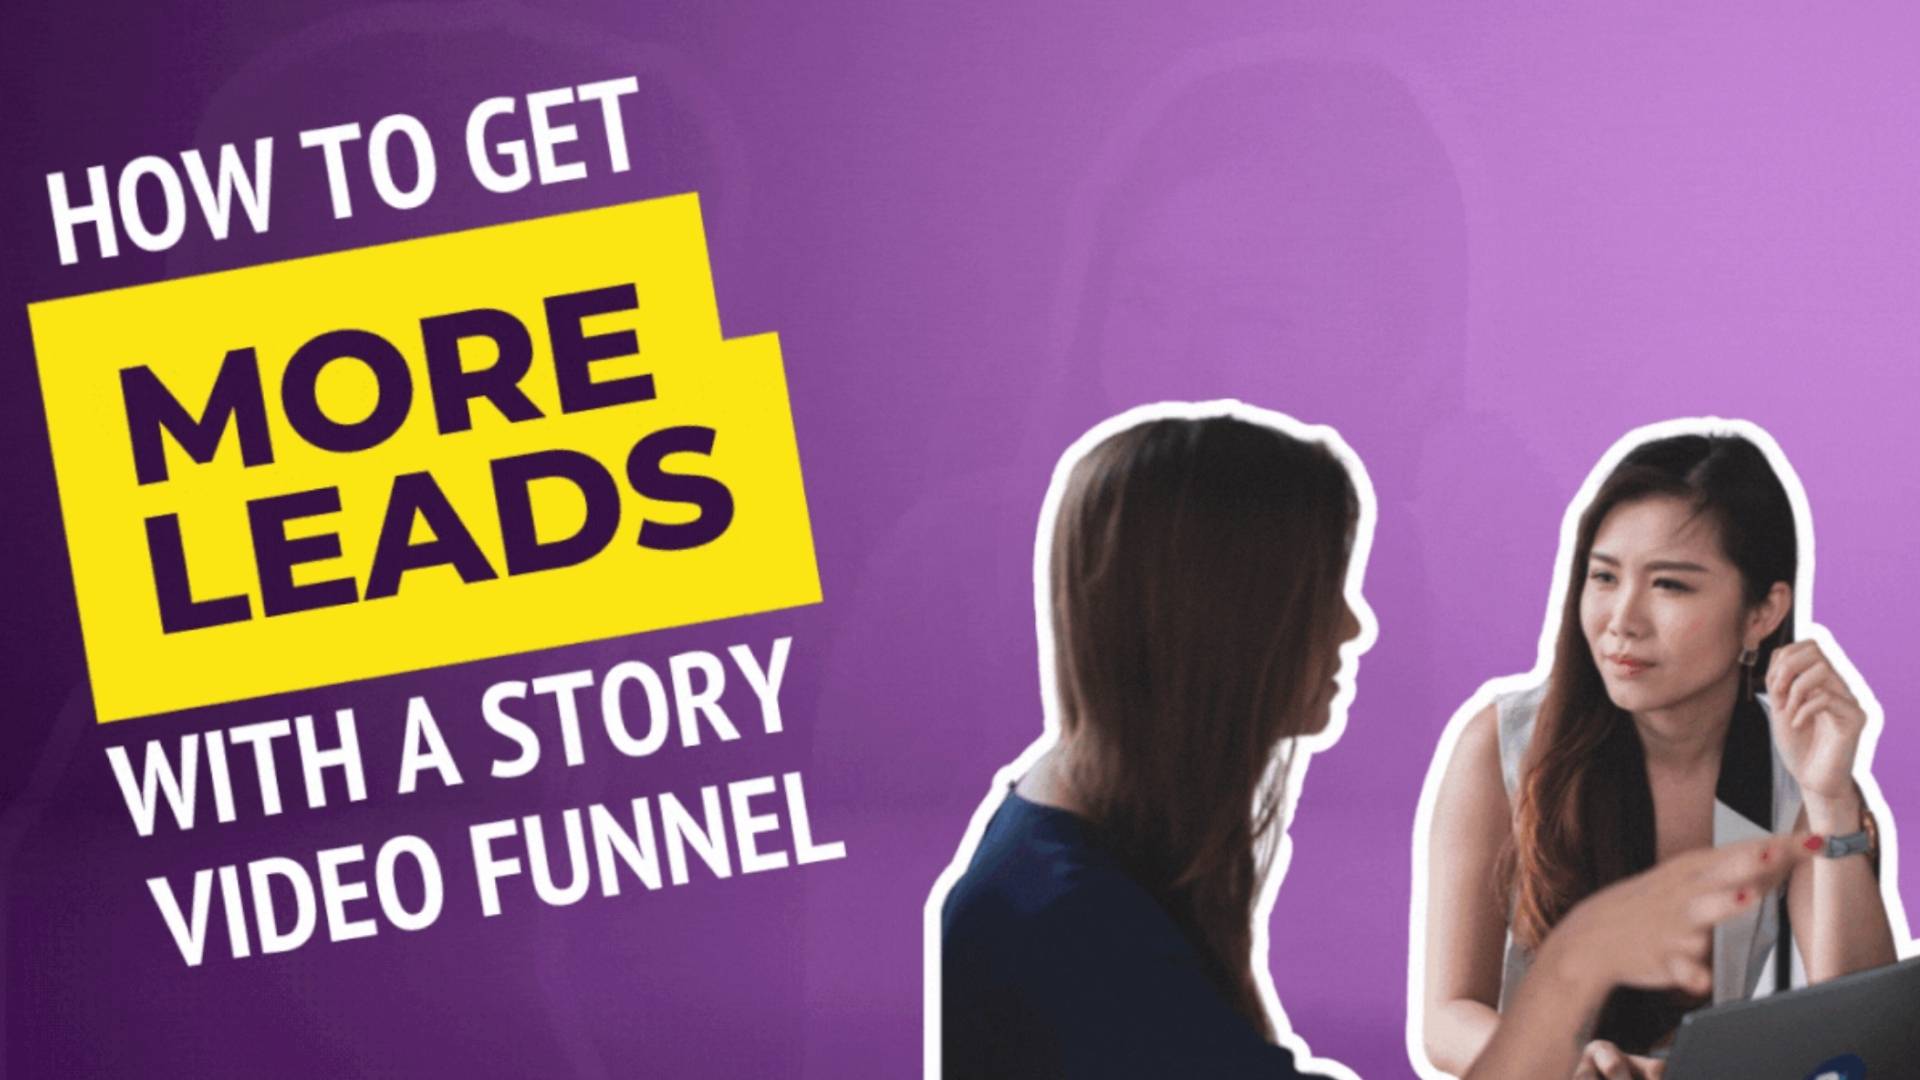 How To Get More Leads With a Story Video Funnel